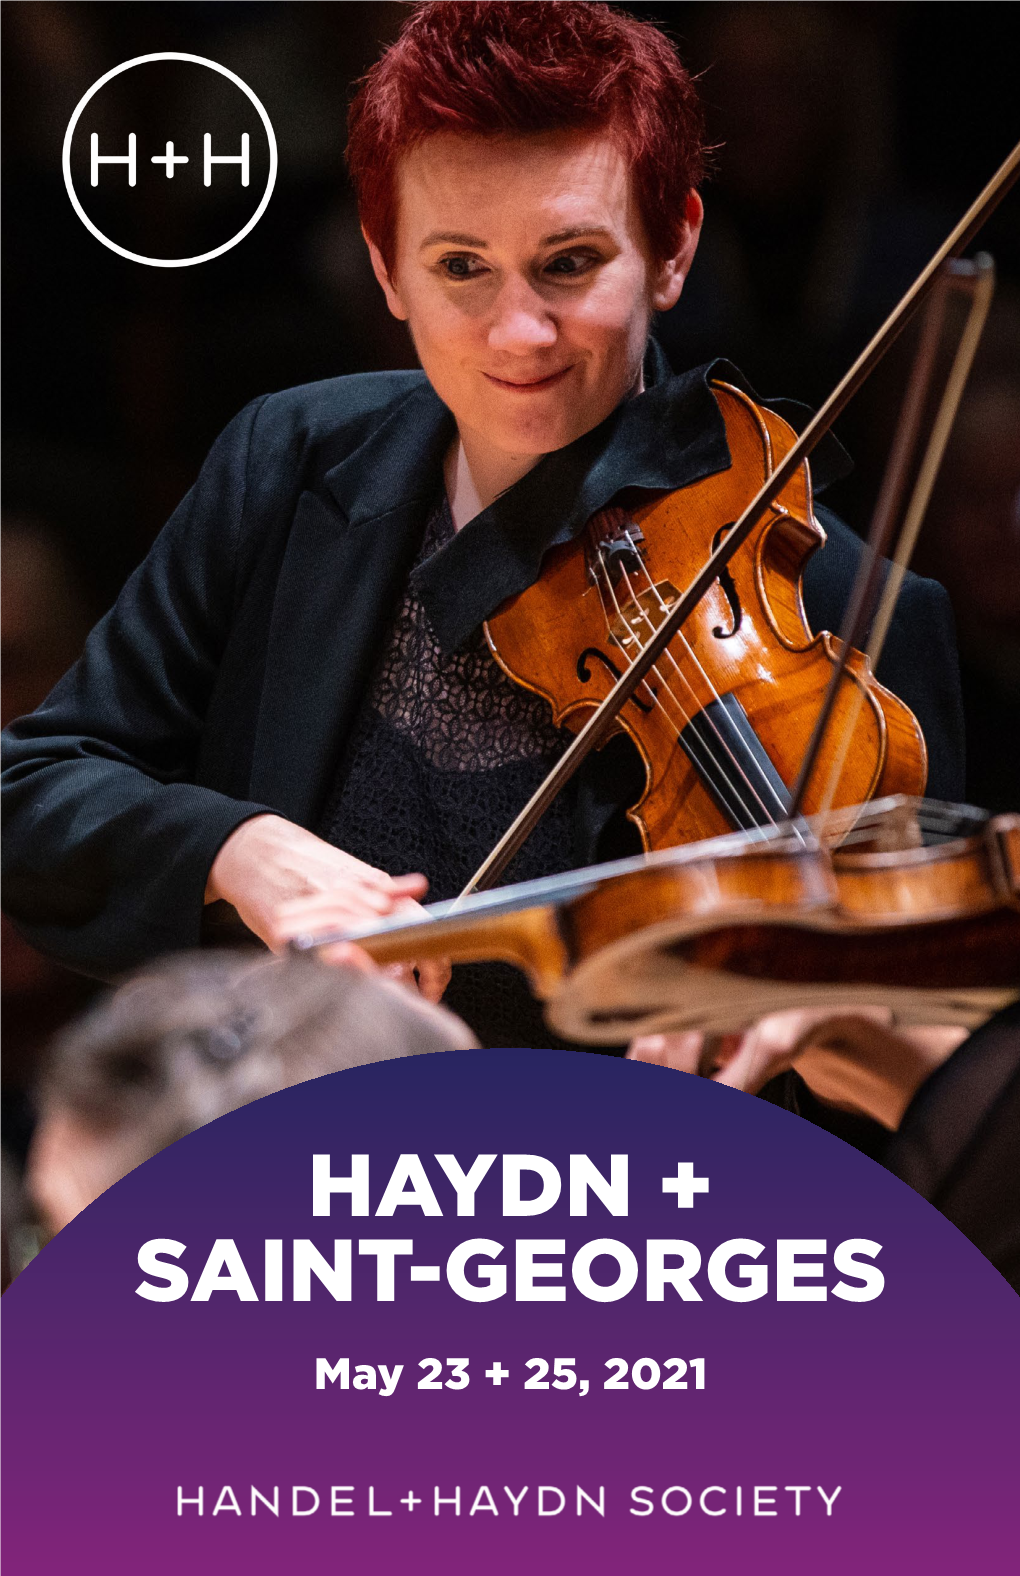 HAYDN + SAINT-GEORGES May 23 + 25, 2021 PROGRAM NOTES HAYDN + UNIQUELY THEIR OWN